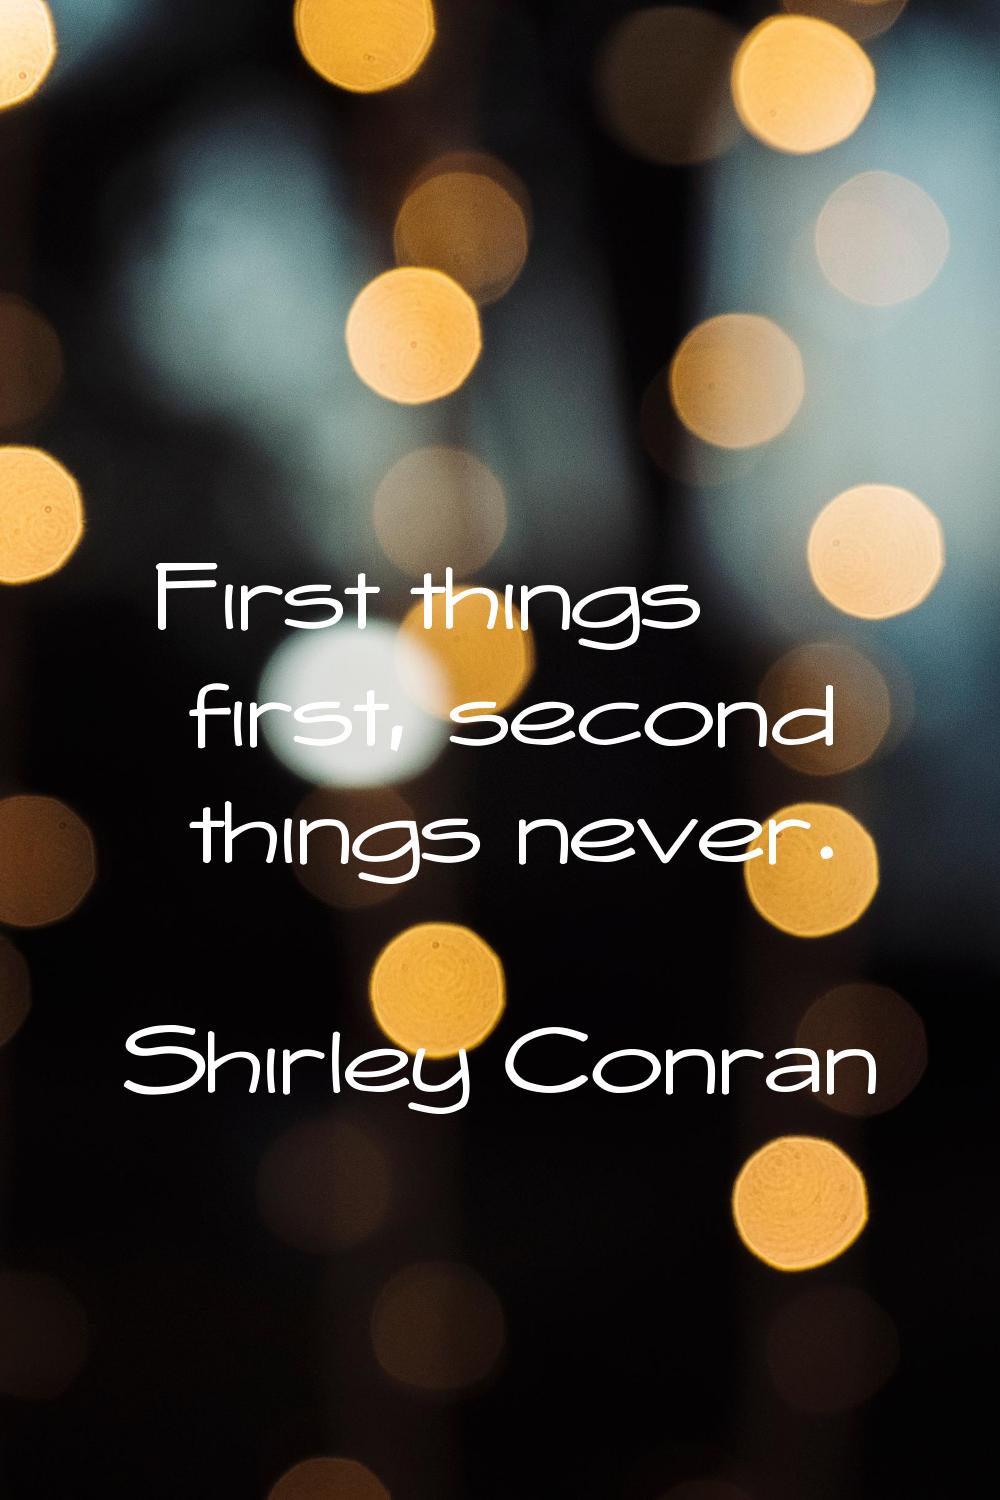 First things first, second things never.